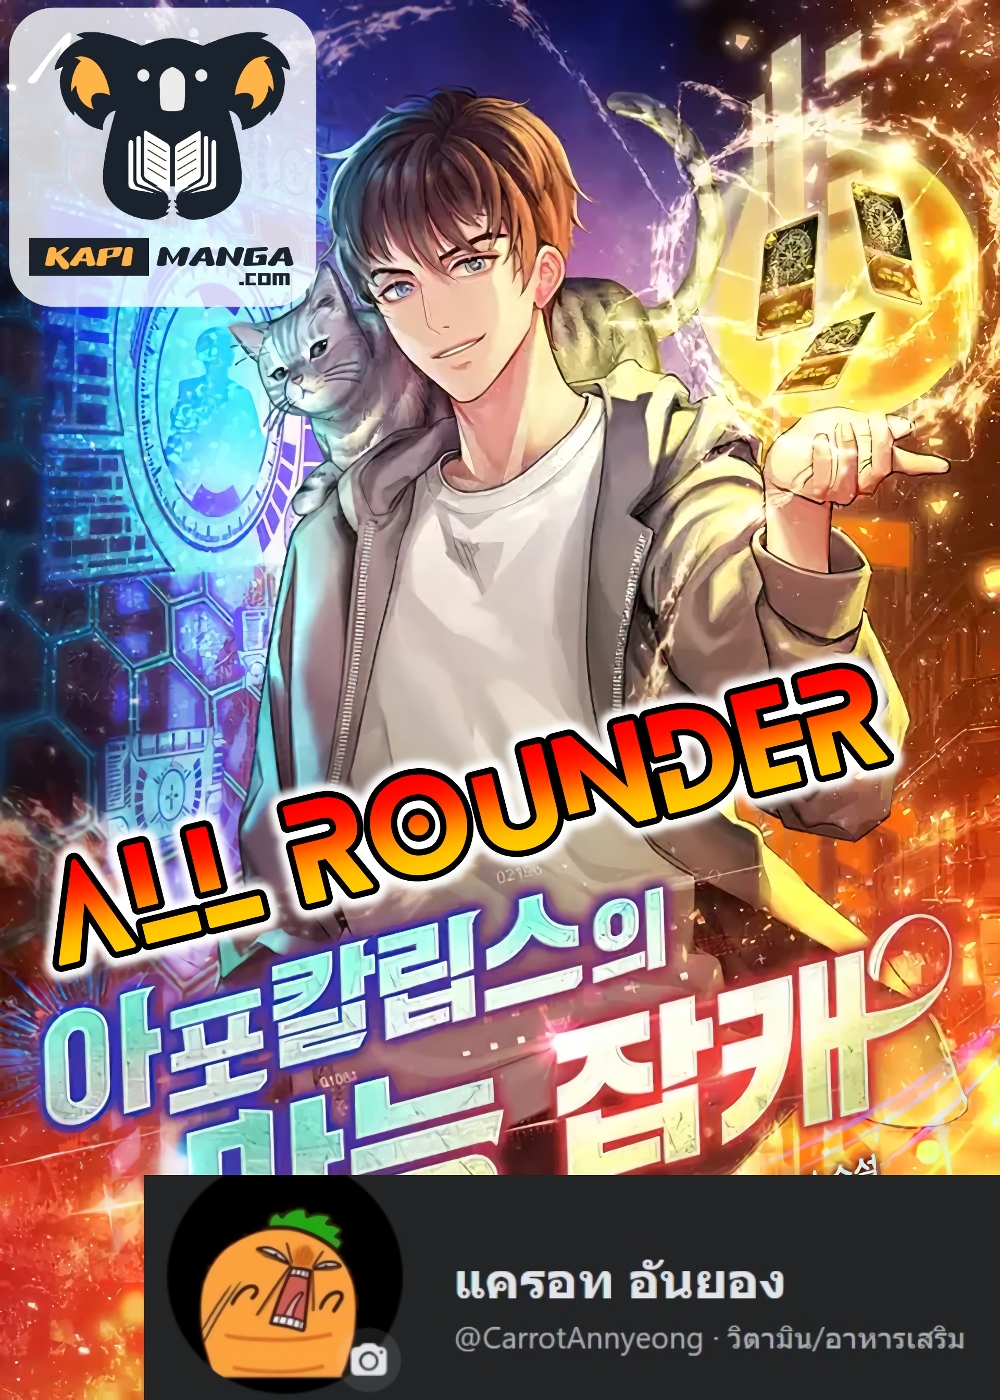 All Rounder32 (1)